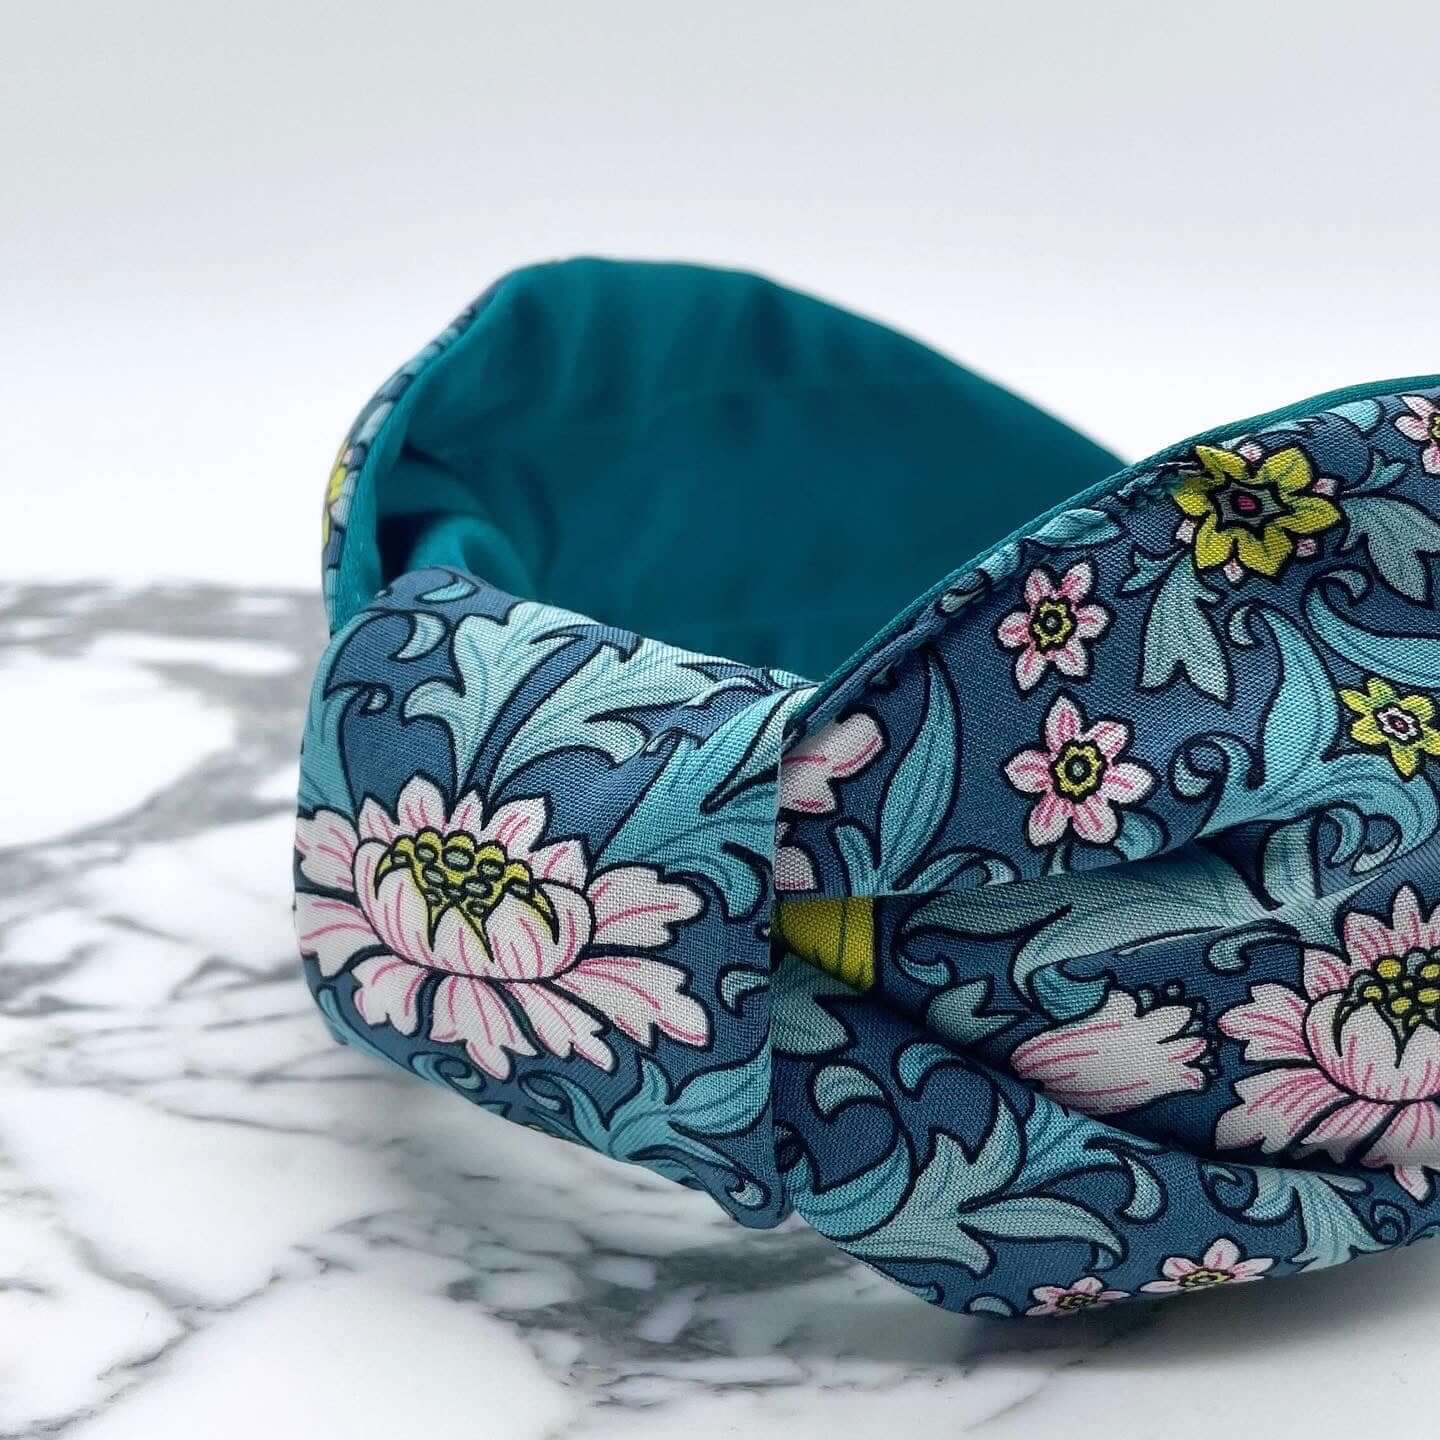 William Morris- Inspired Knot Headband with satin lining in blue. Flowers and leaves print